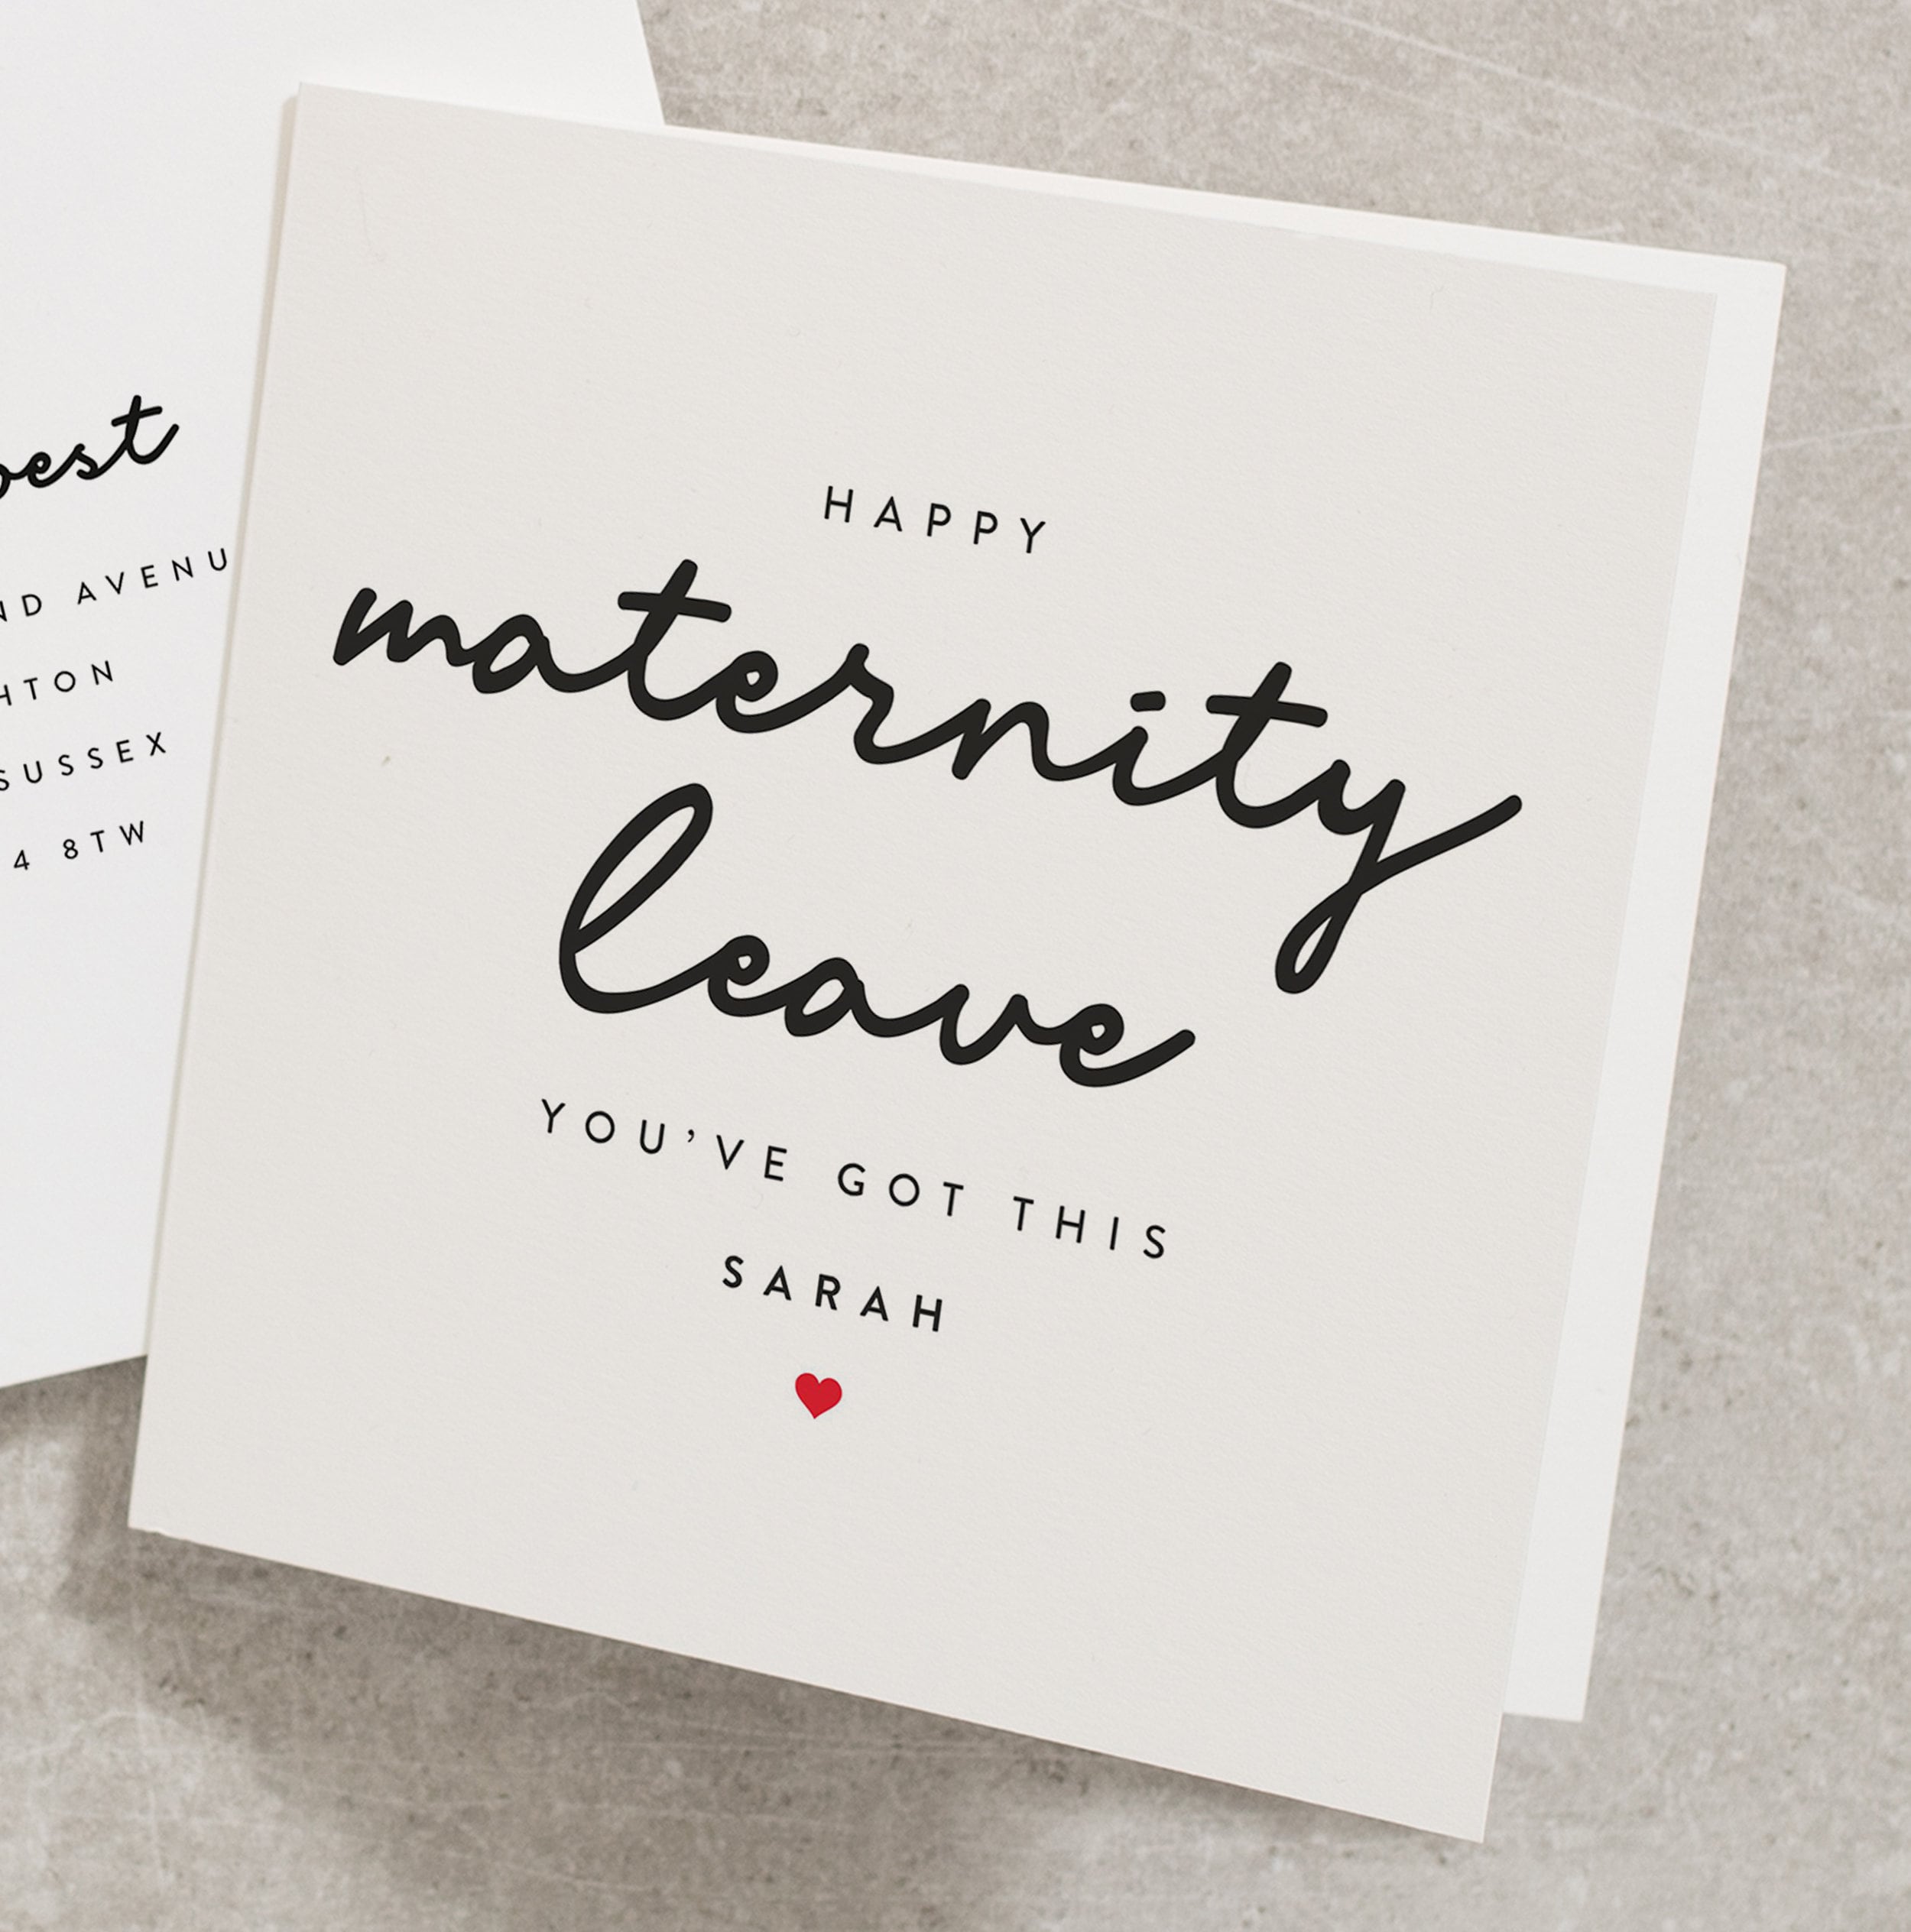 Maternity Leave Gift Ideas for Coworkers & Employees